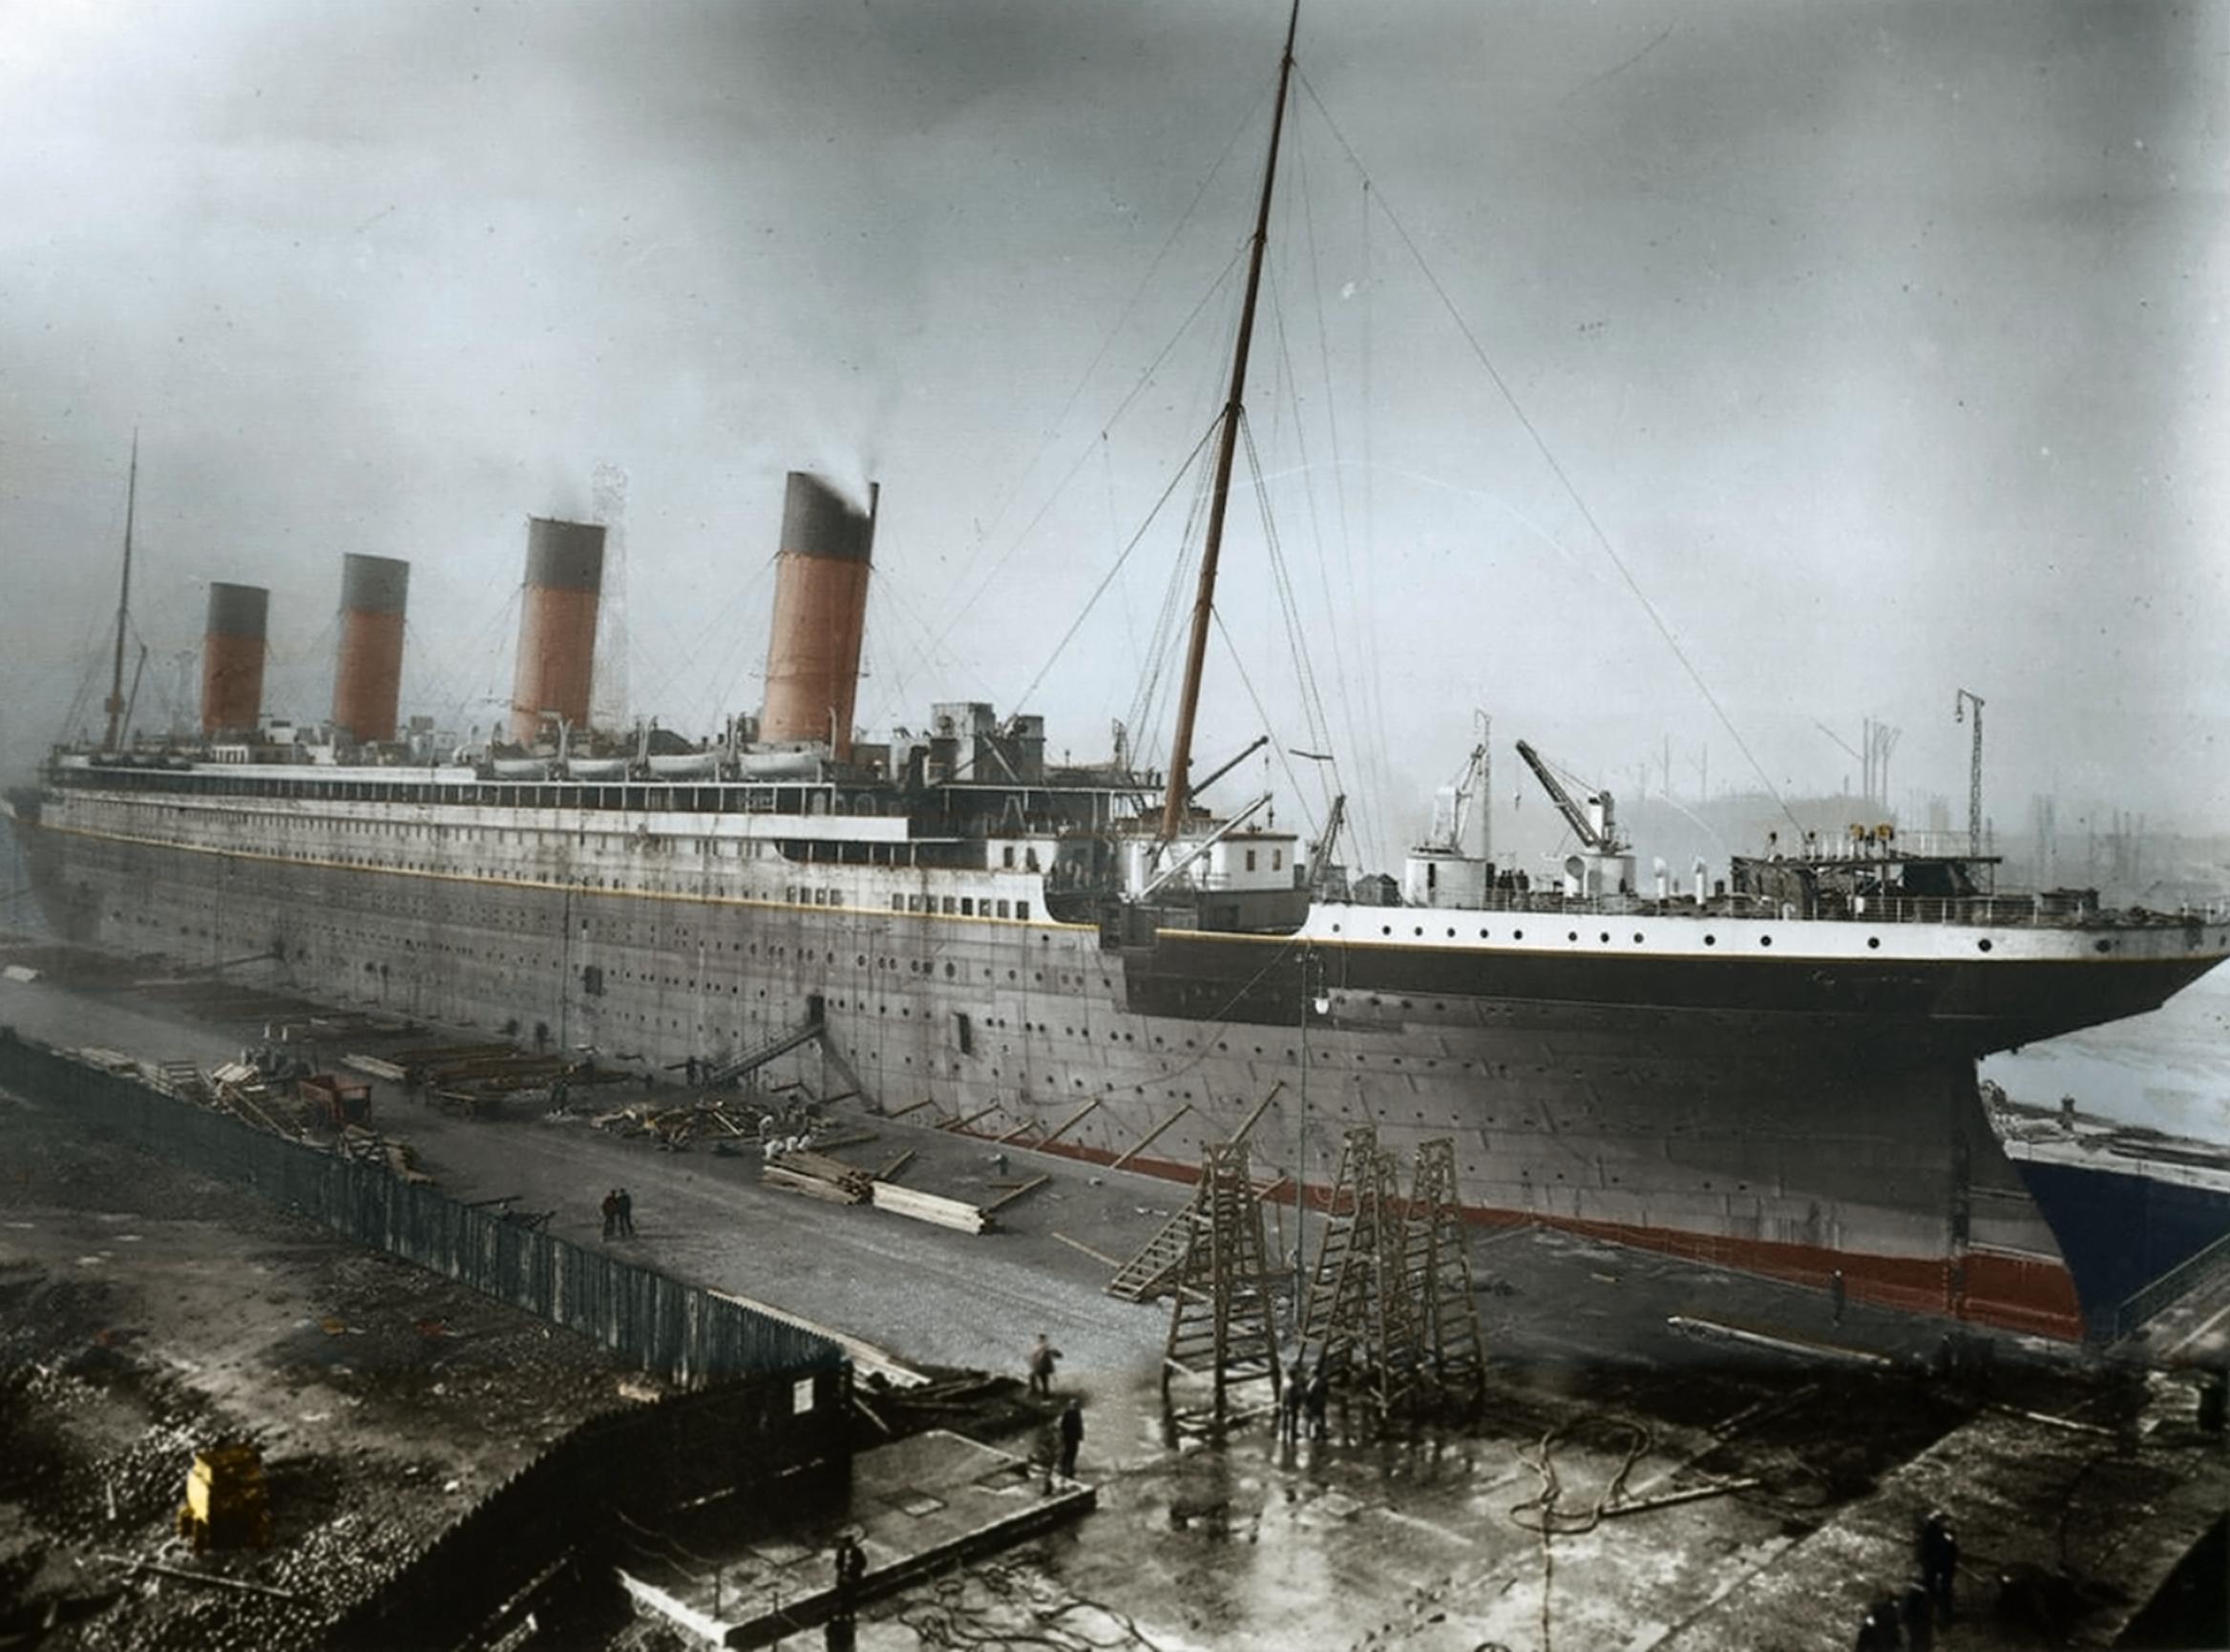 Doomed ship Titanic is pictured as you've never seen her before